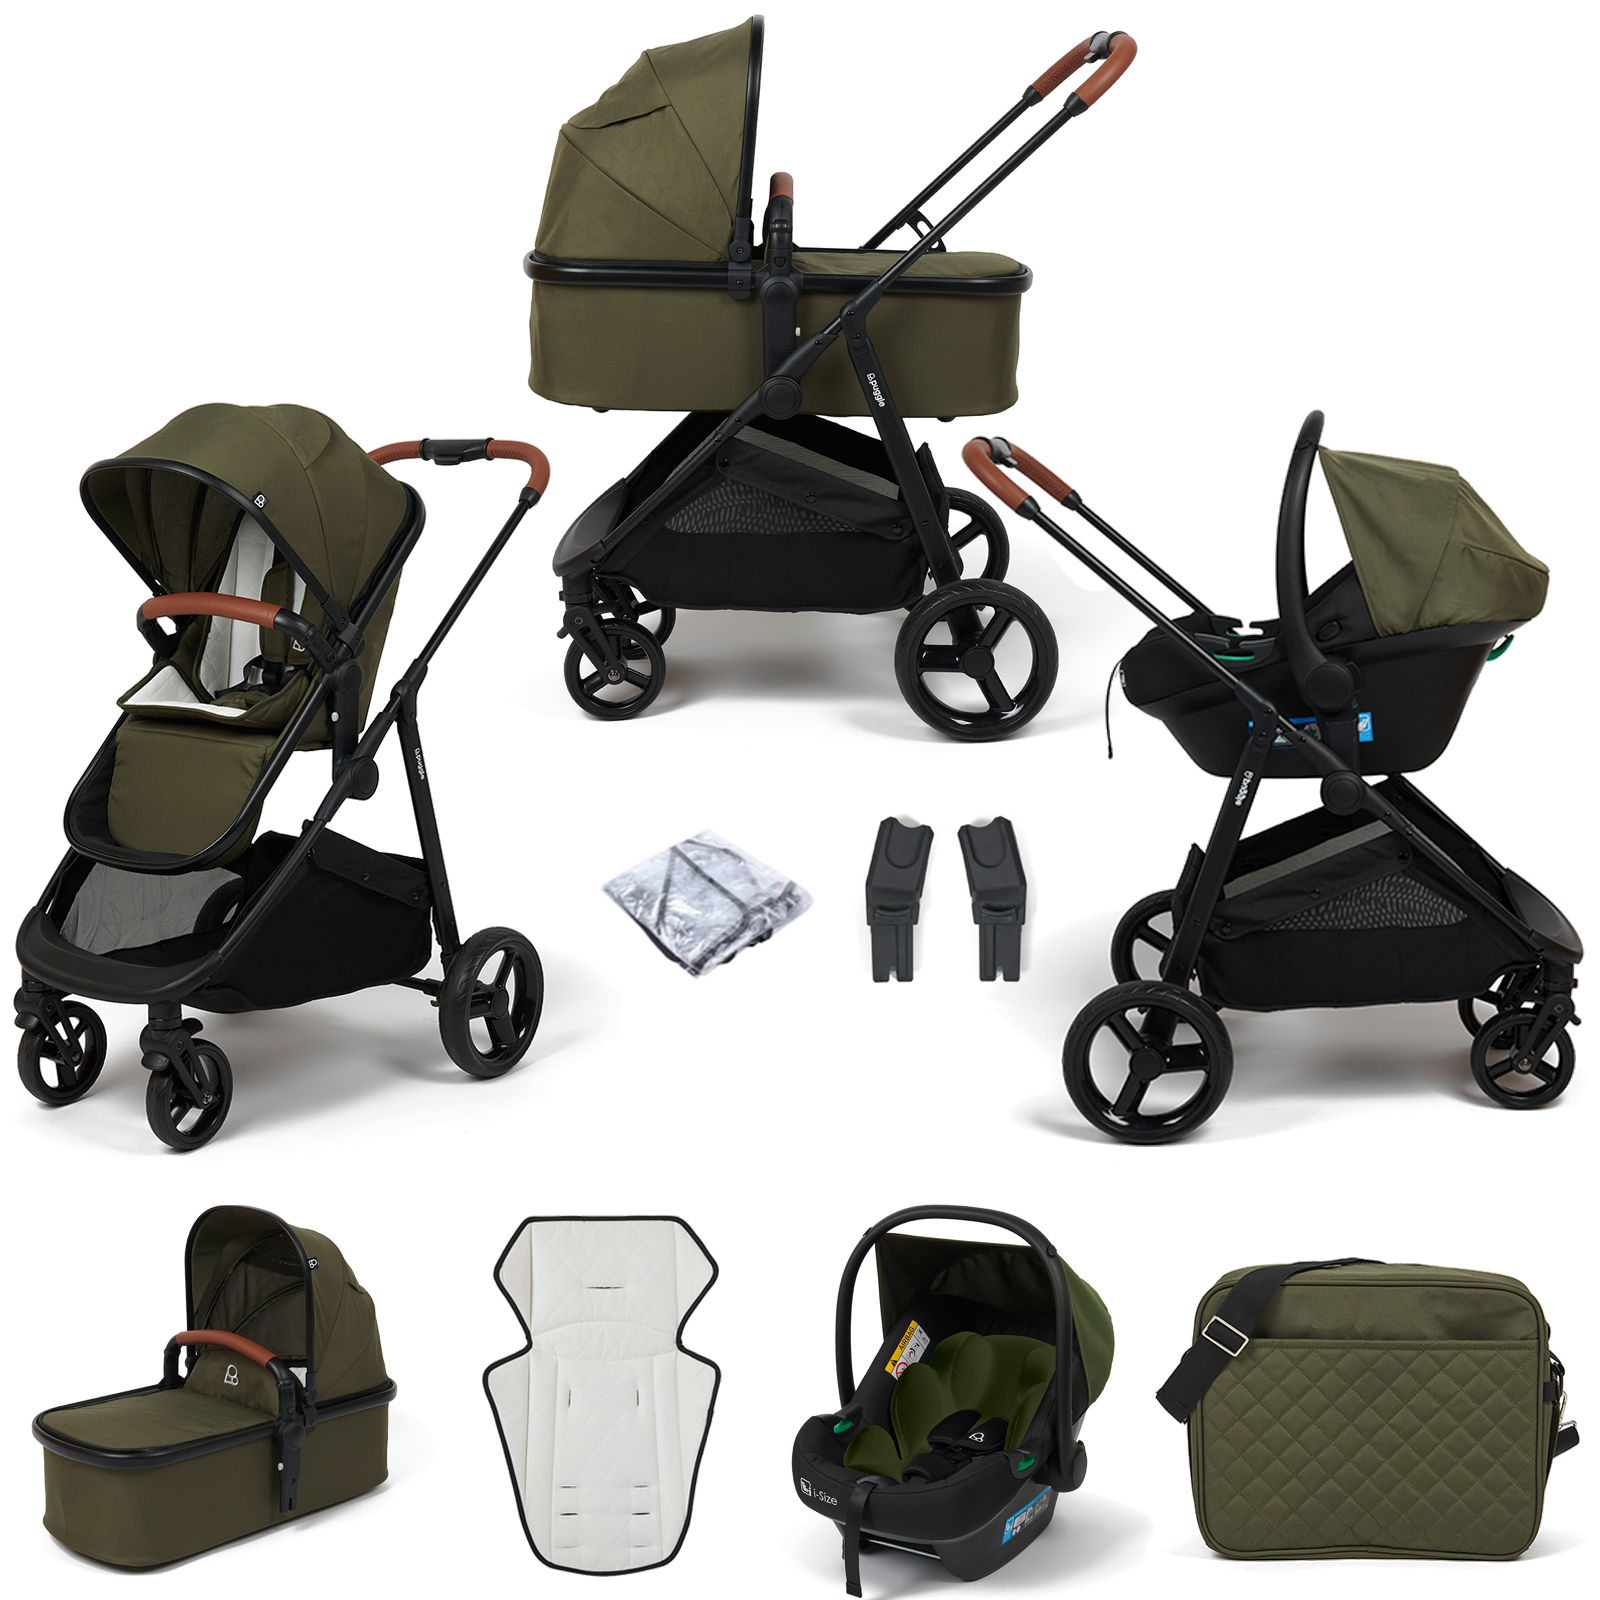 Puggle Monaco XT 3in1 i-Size Travel System with Changing Bag - Forest Green